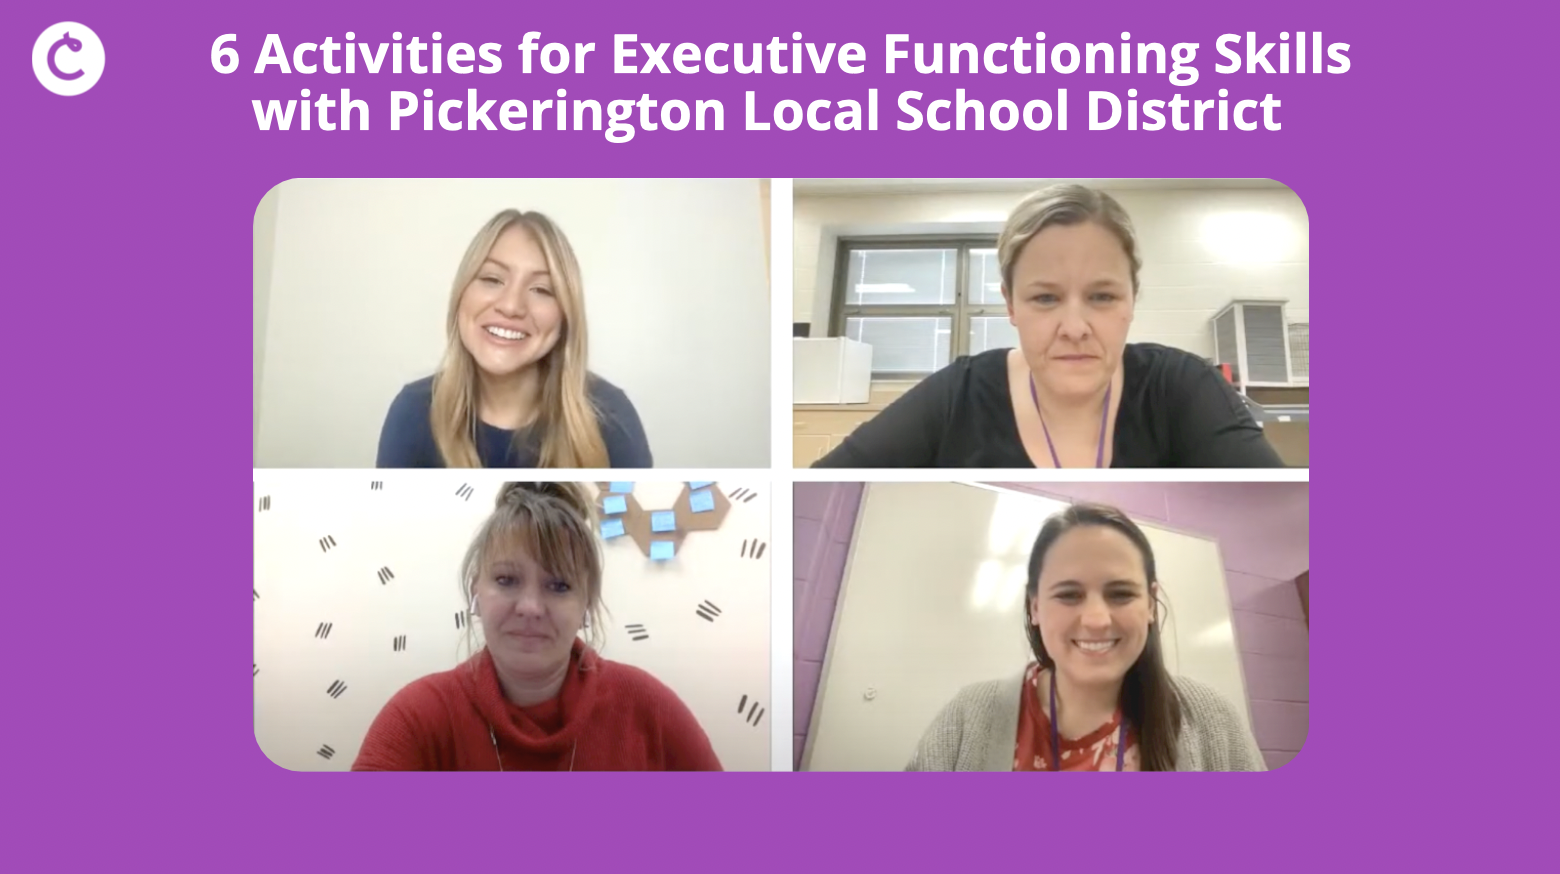 6 Activities for Executive Functioning Skills with Pickerington Local School District